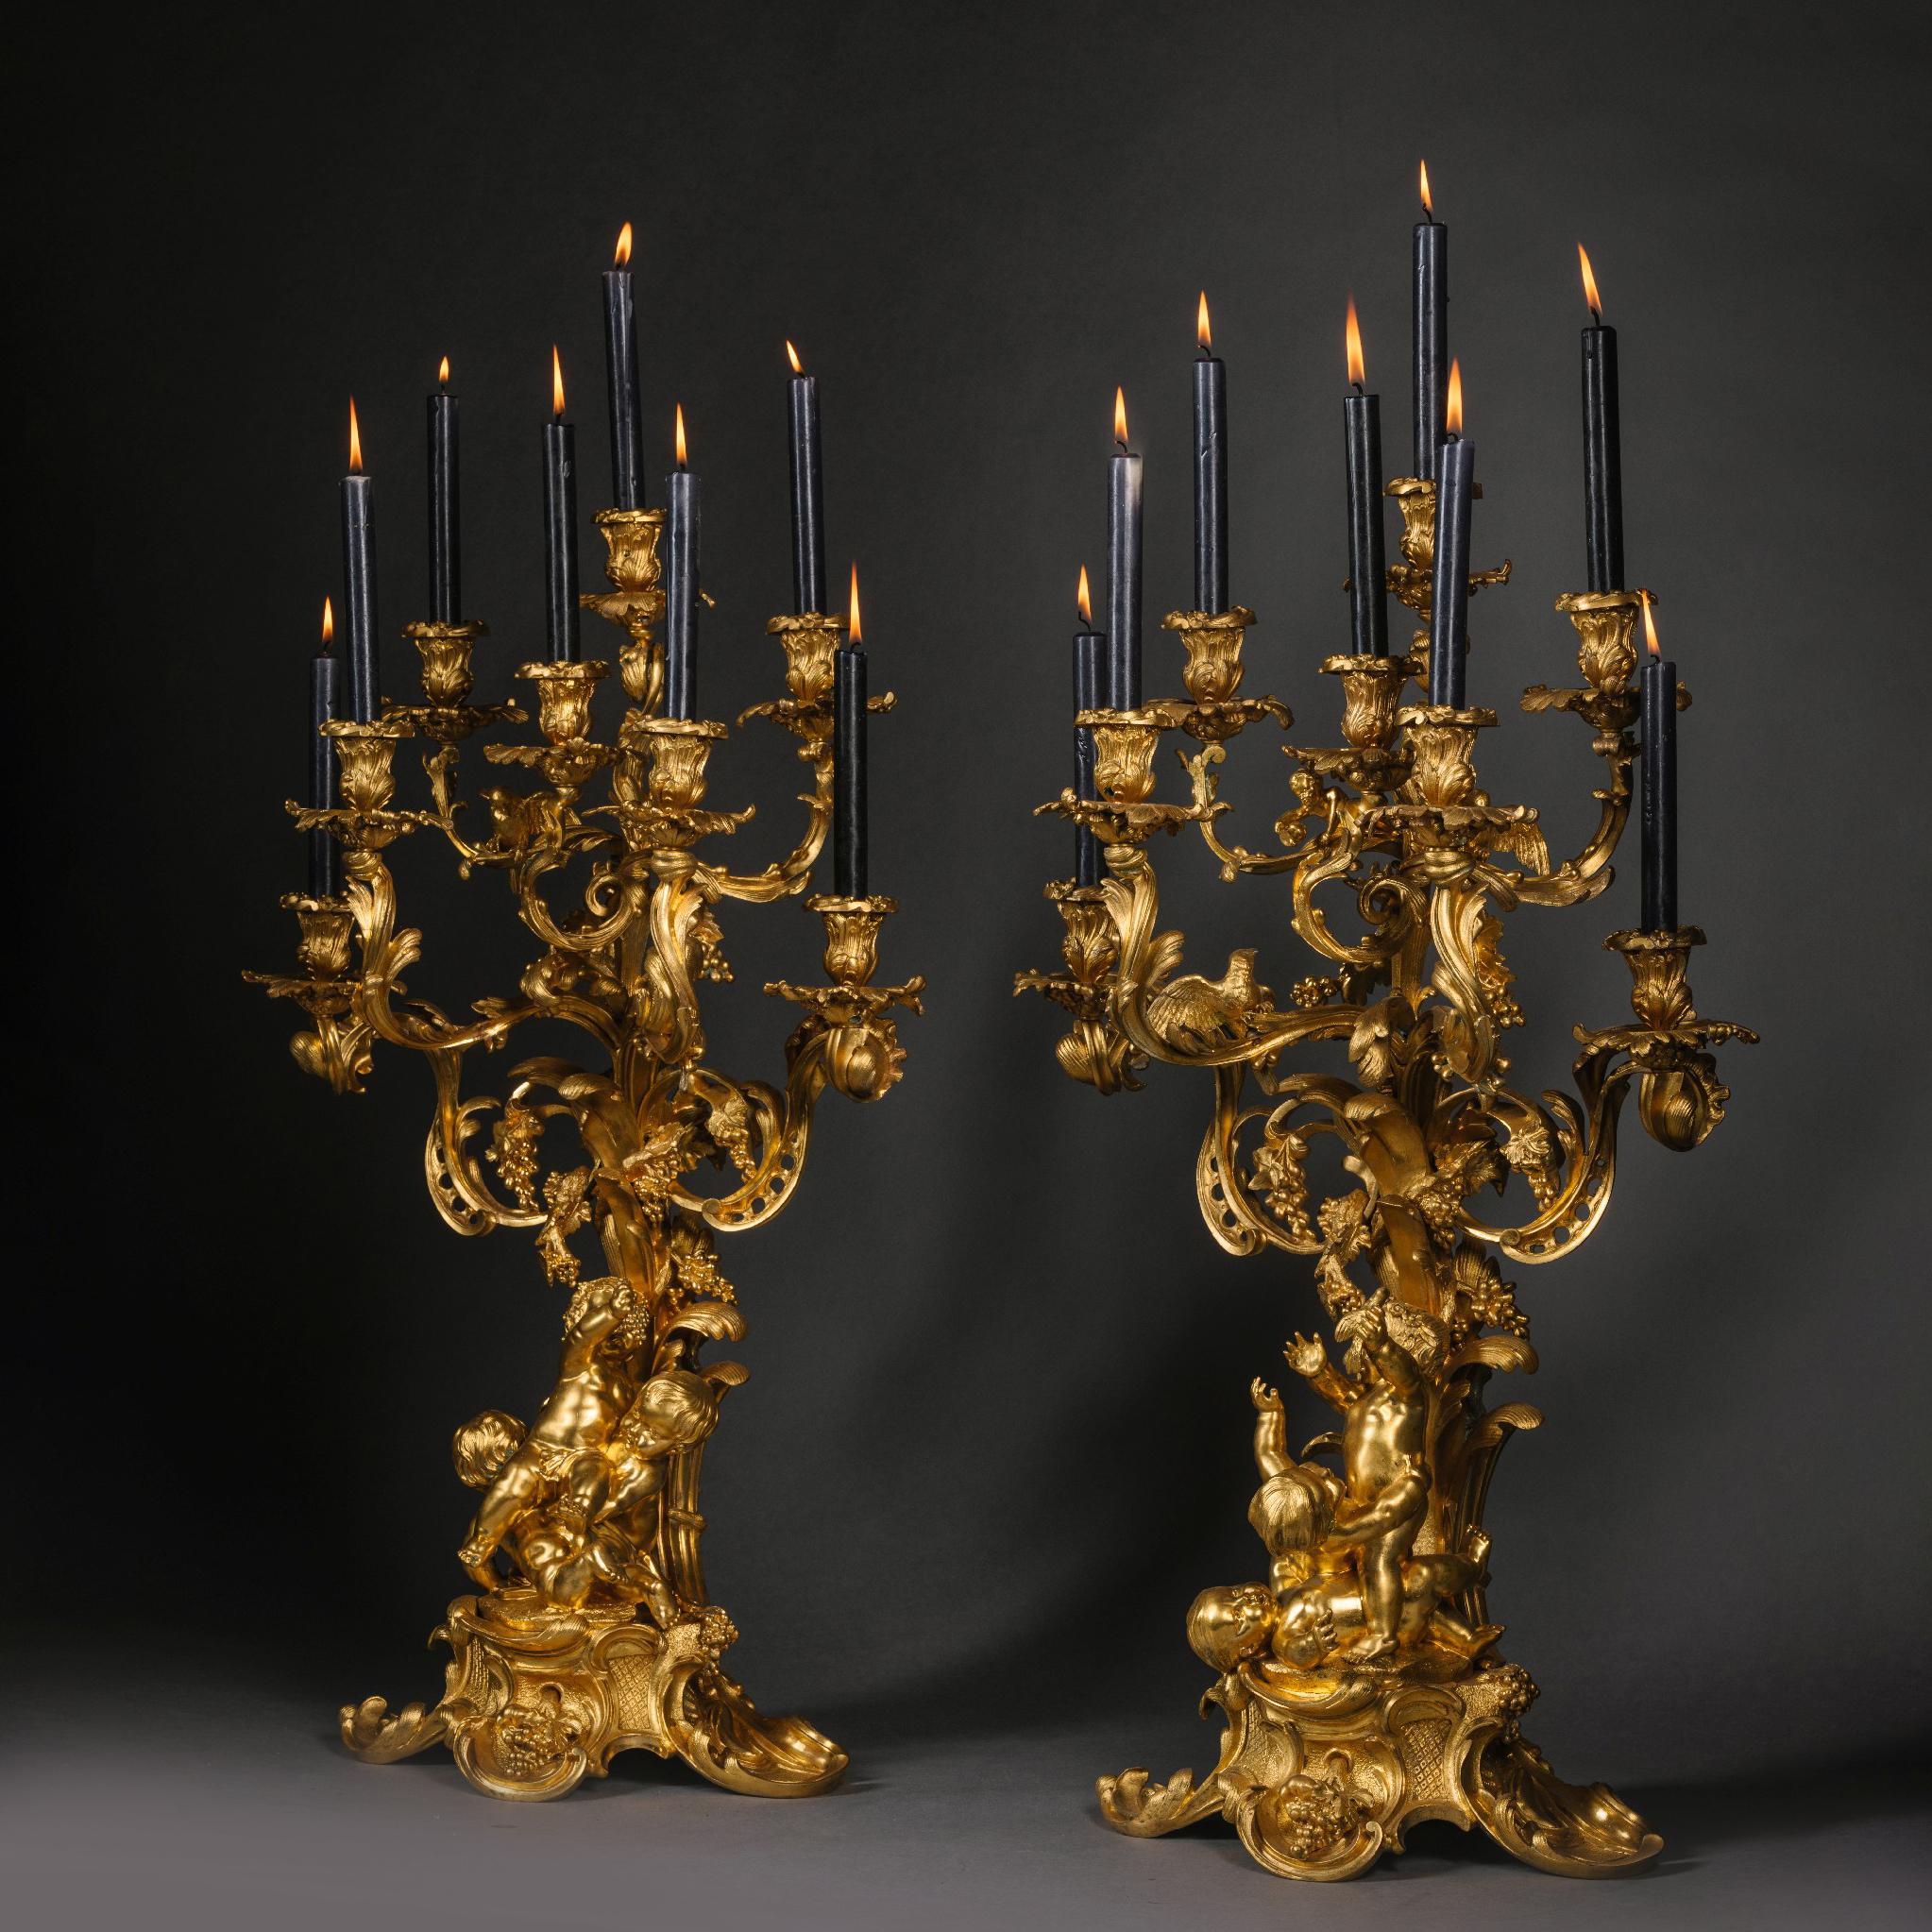 A Pair of Louis XV Style Gilt-Bronze Eight-Light Candelabra, Attributed to Victor Paillard.

Each exuberantly modelled in the high rococo style with playful putti clambering to pluck bunches of grapes from a tree. The scrolled and pierced branches